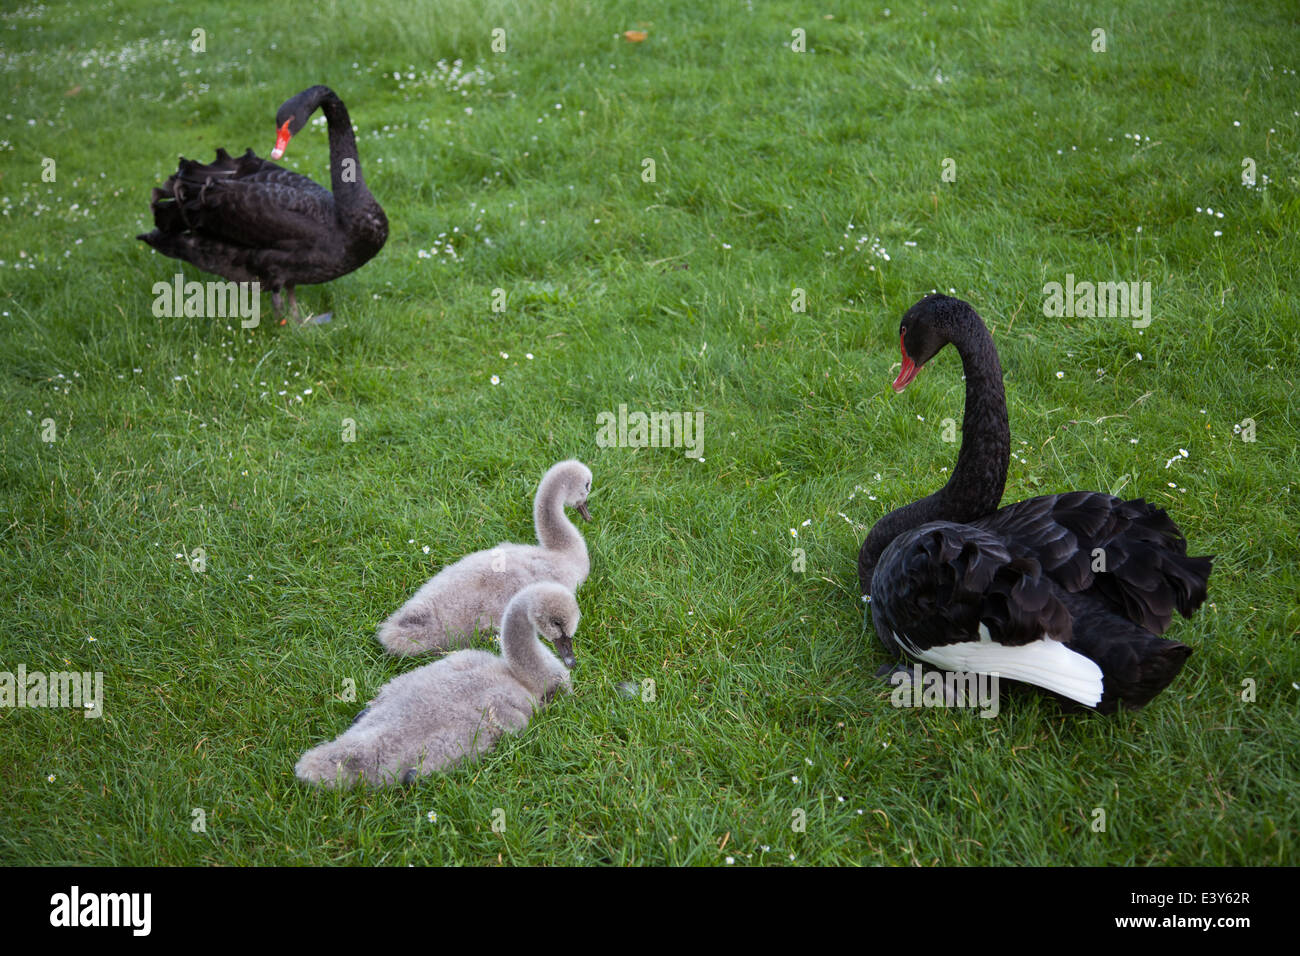 Swan Paris High Resolution Stock Photography and Images - Alamy